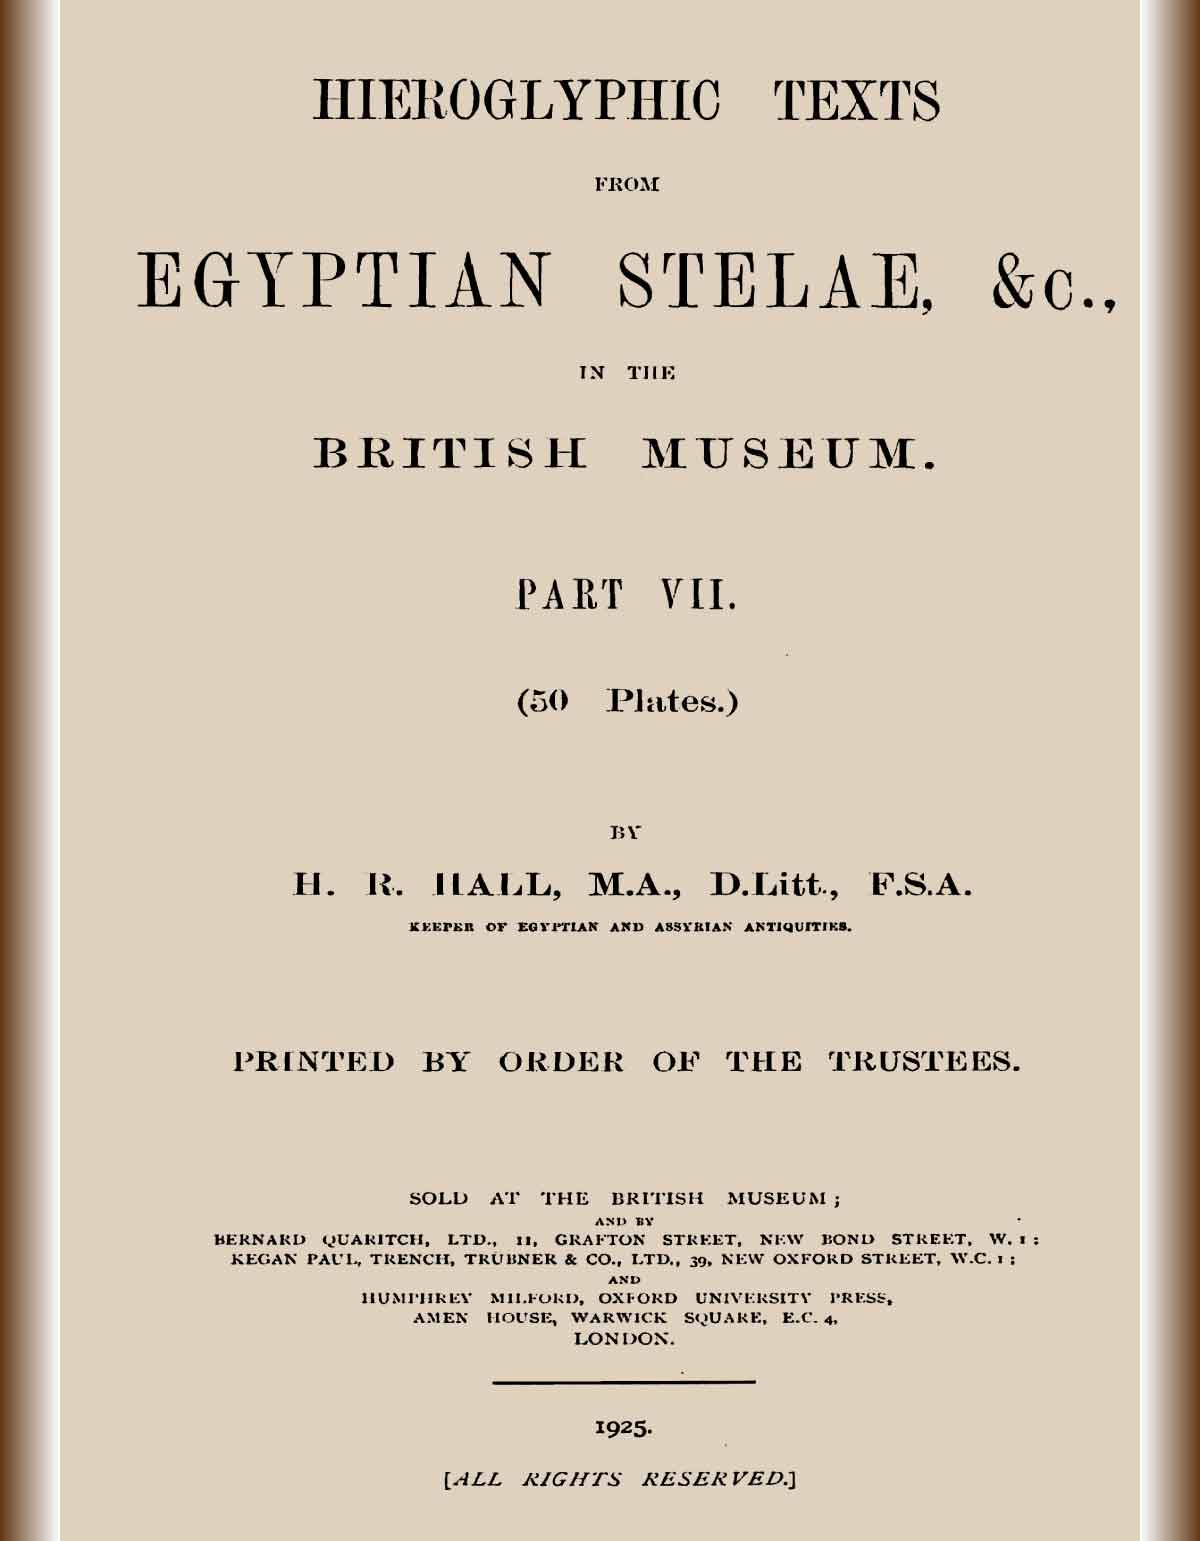 Hieroglyphic texts from Egyptian stelae, &c., in the British Museum. Part 7-cover